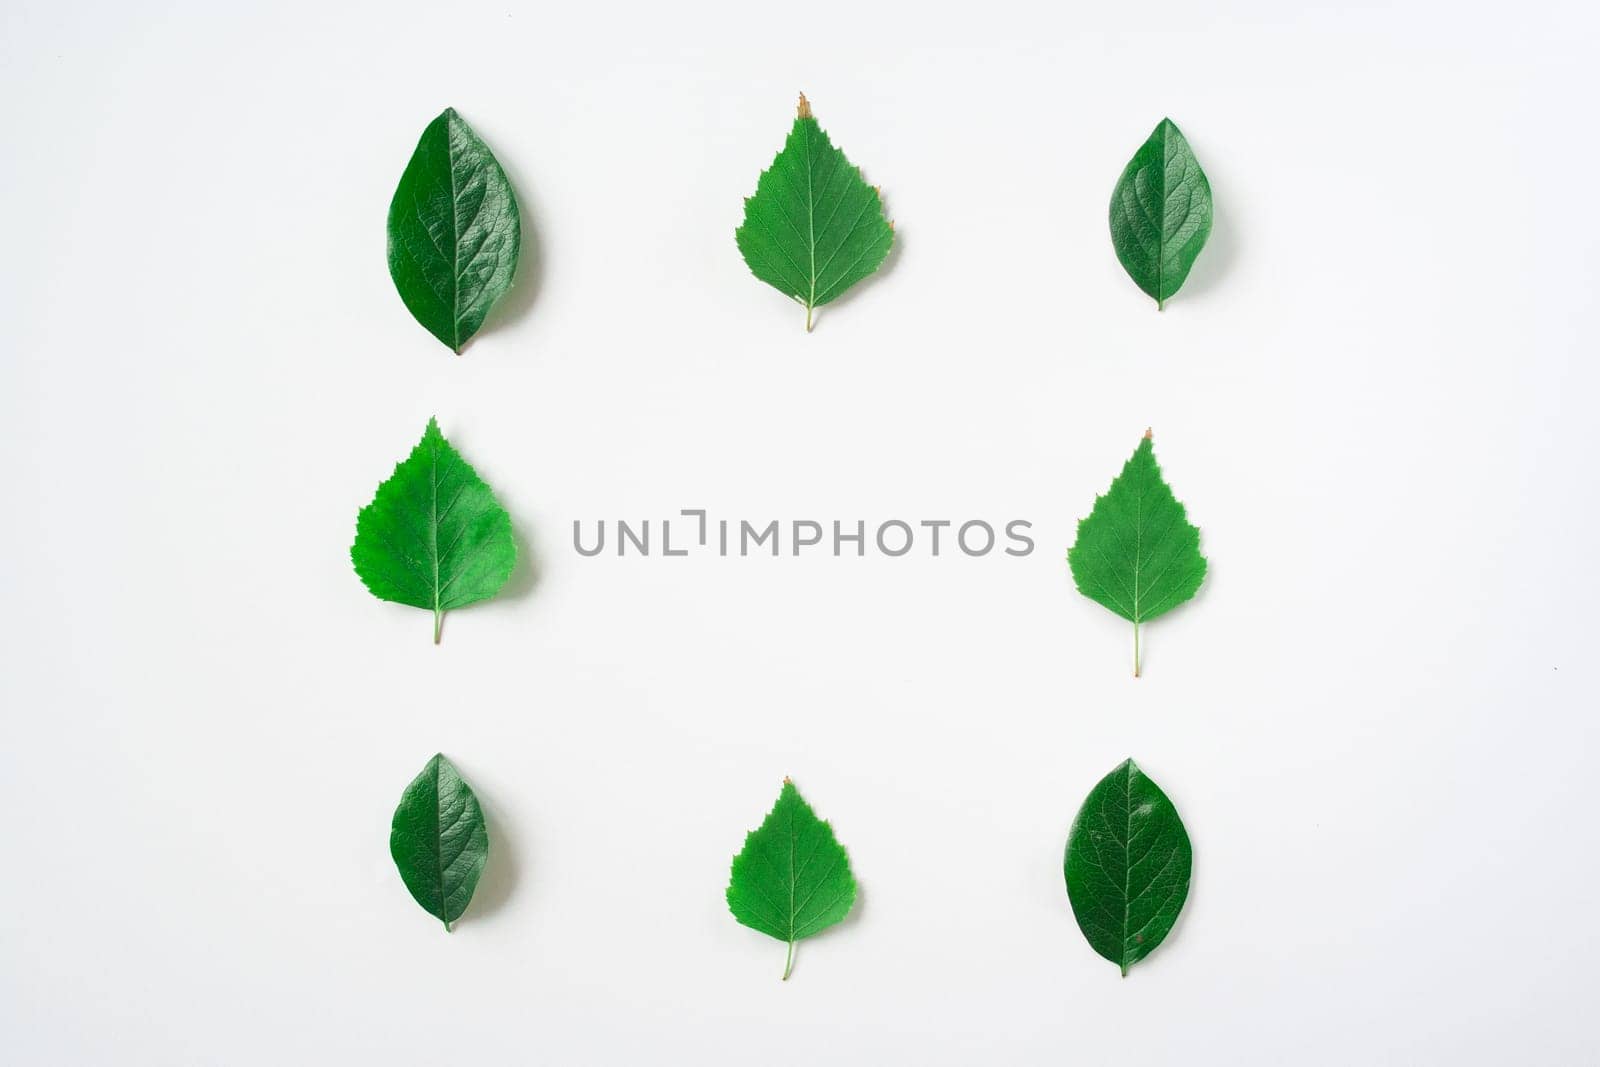 green leaves square frame banner top view isolated on white background with copy space. flat lay